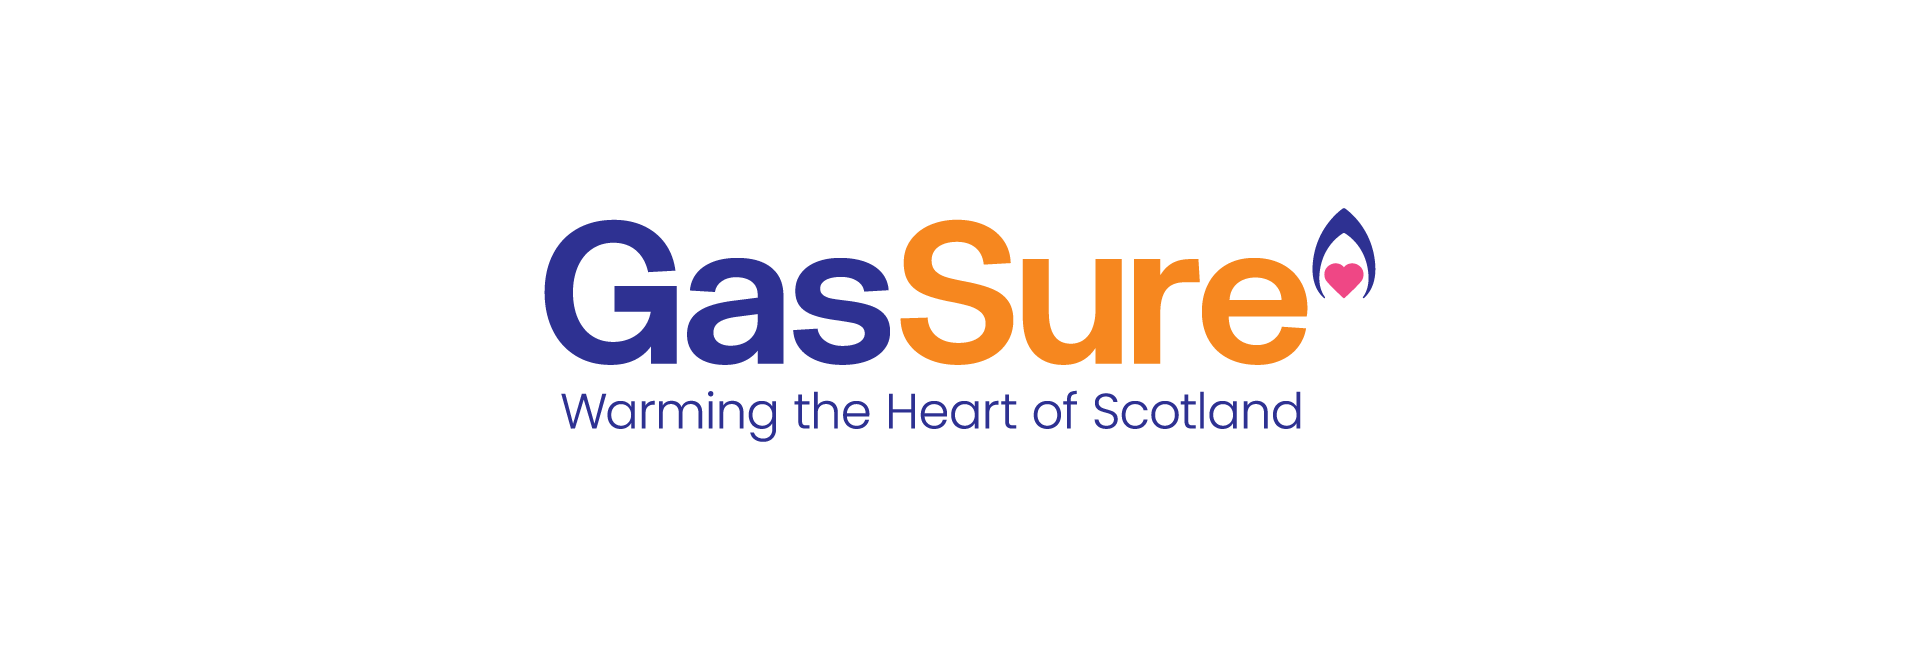 a blue and orange gassure logo on a white background